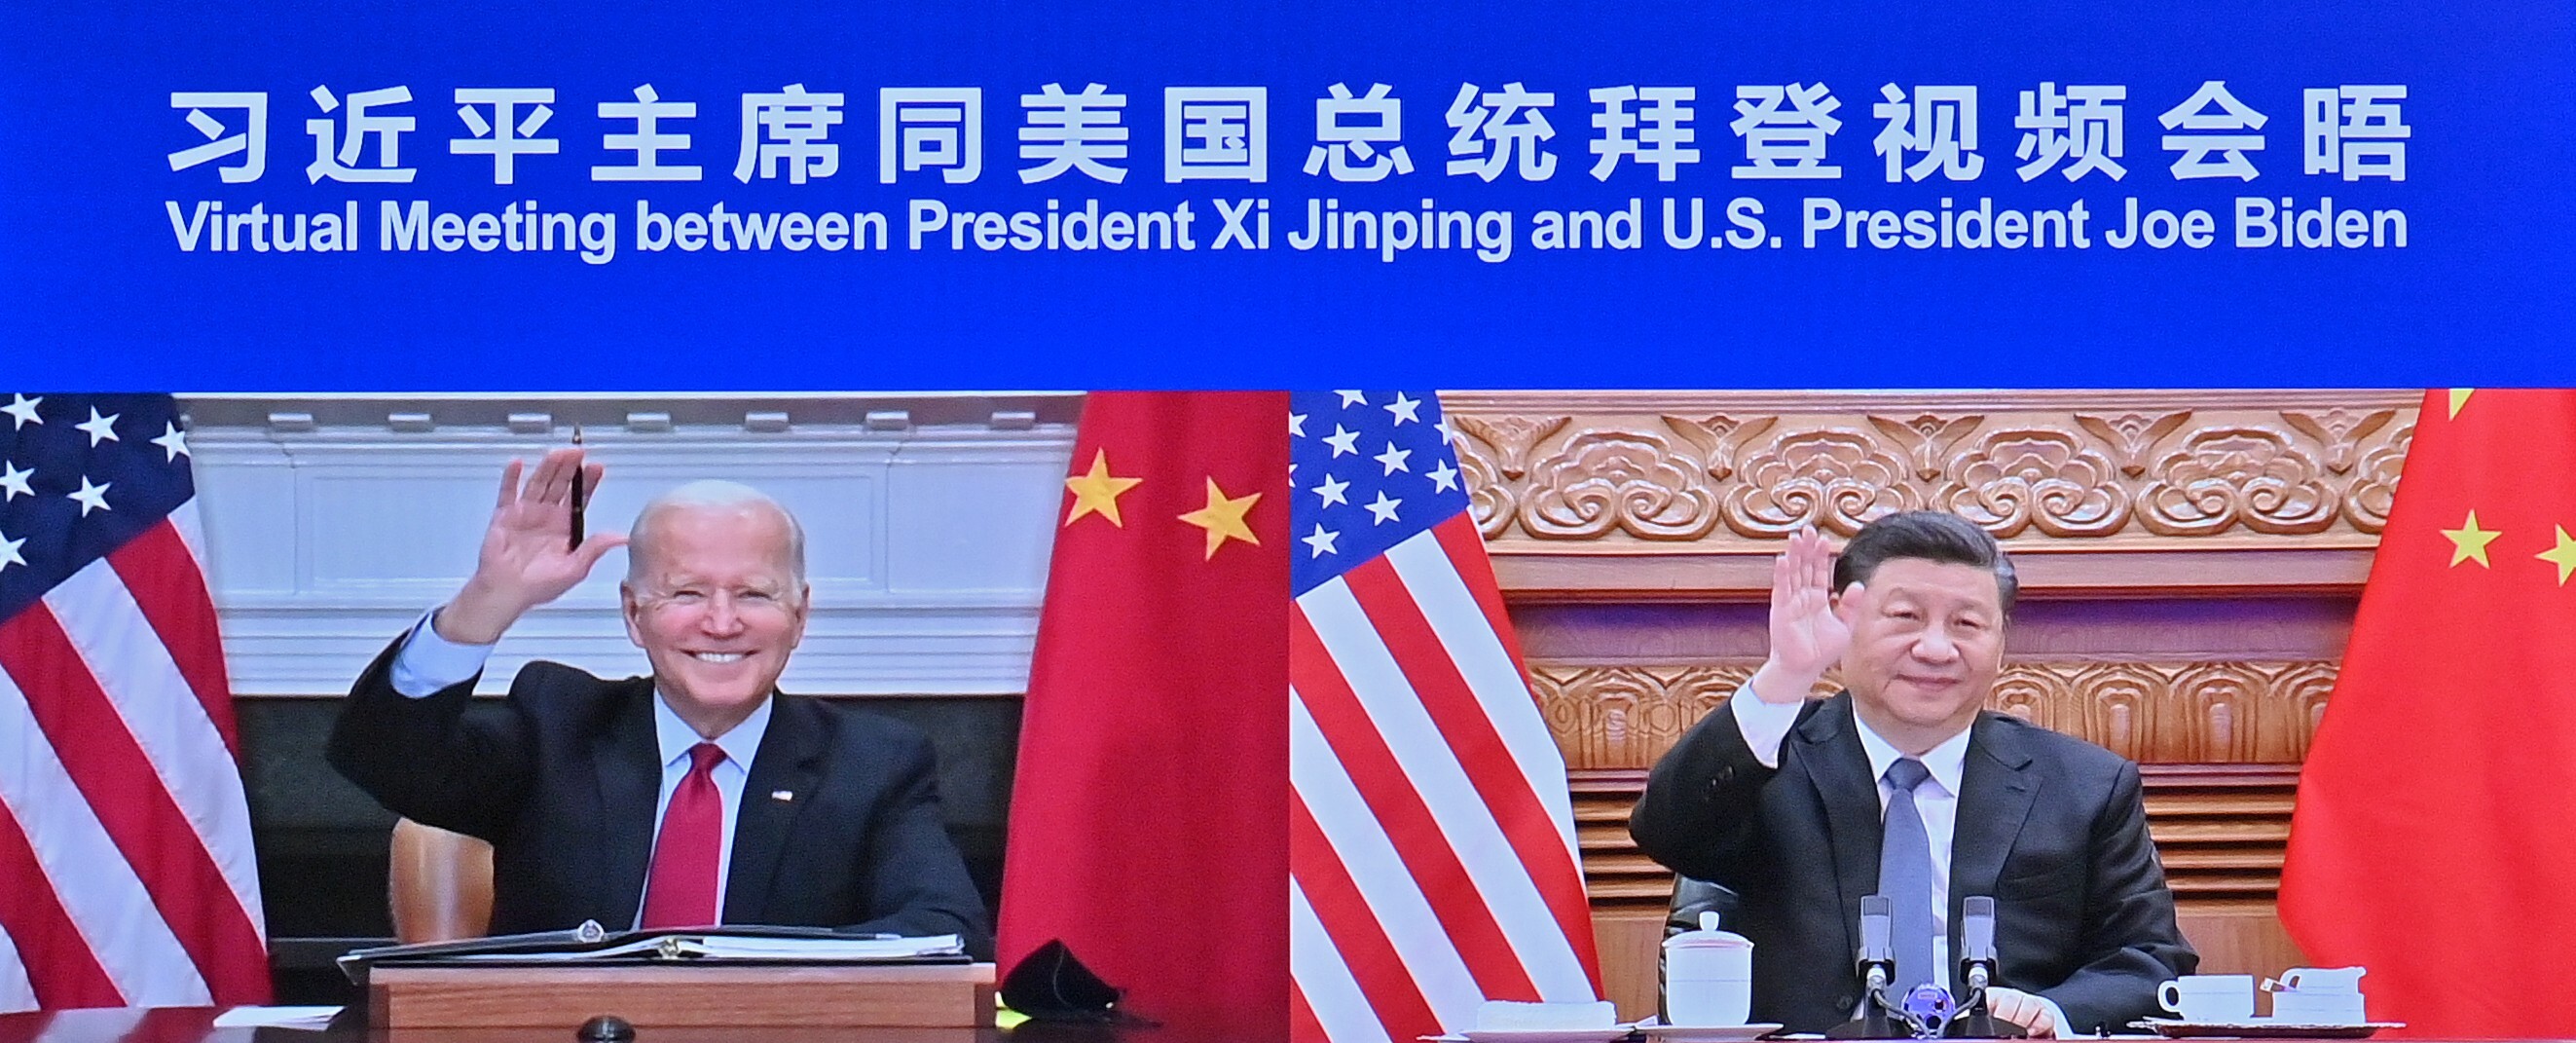 Xi-Biden summit: who were the key players at the talks? | South China Morning Post